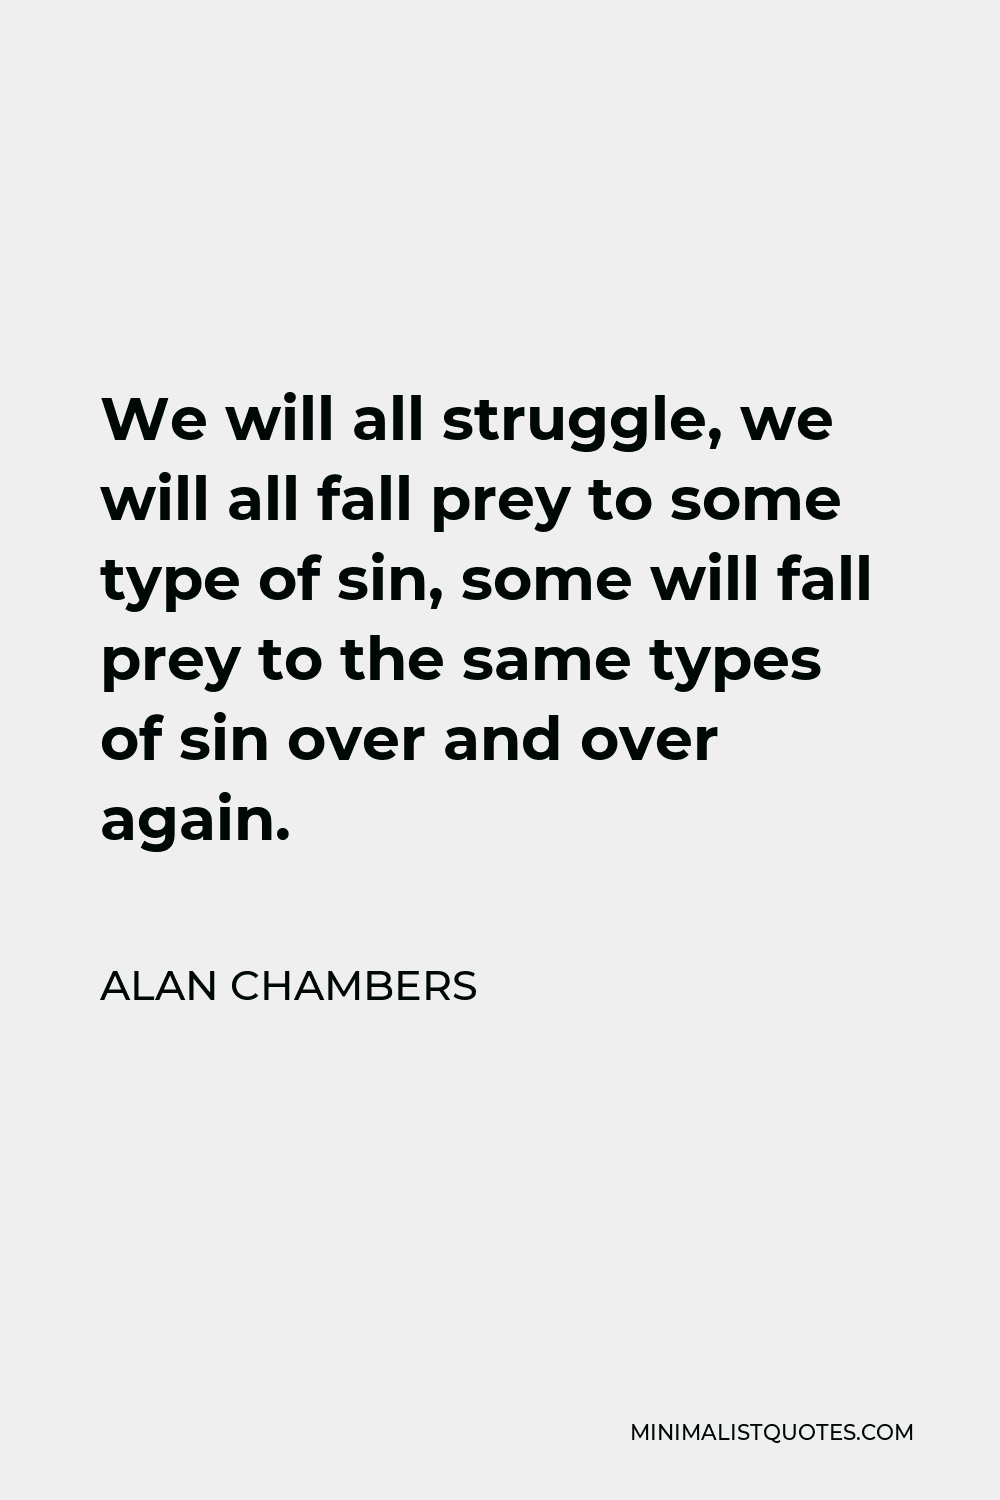 Alan Chambers Quote - We will all struggle, we will all fall prey to some type of sin, some will fall prey to the same types of sin over and over again.